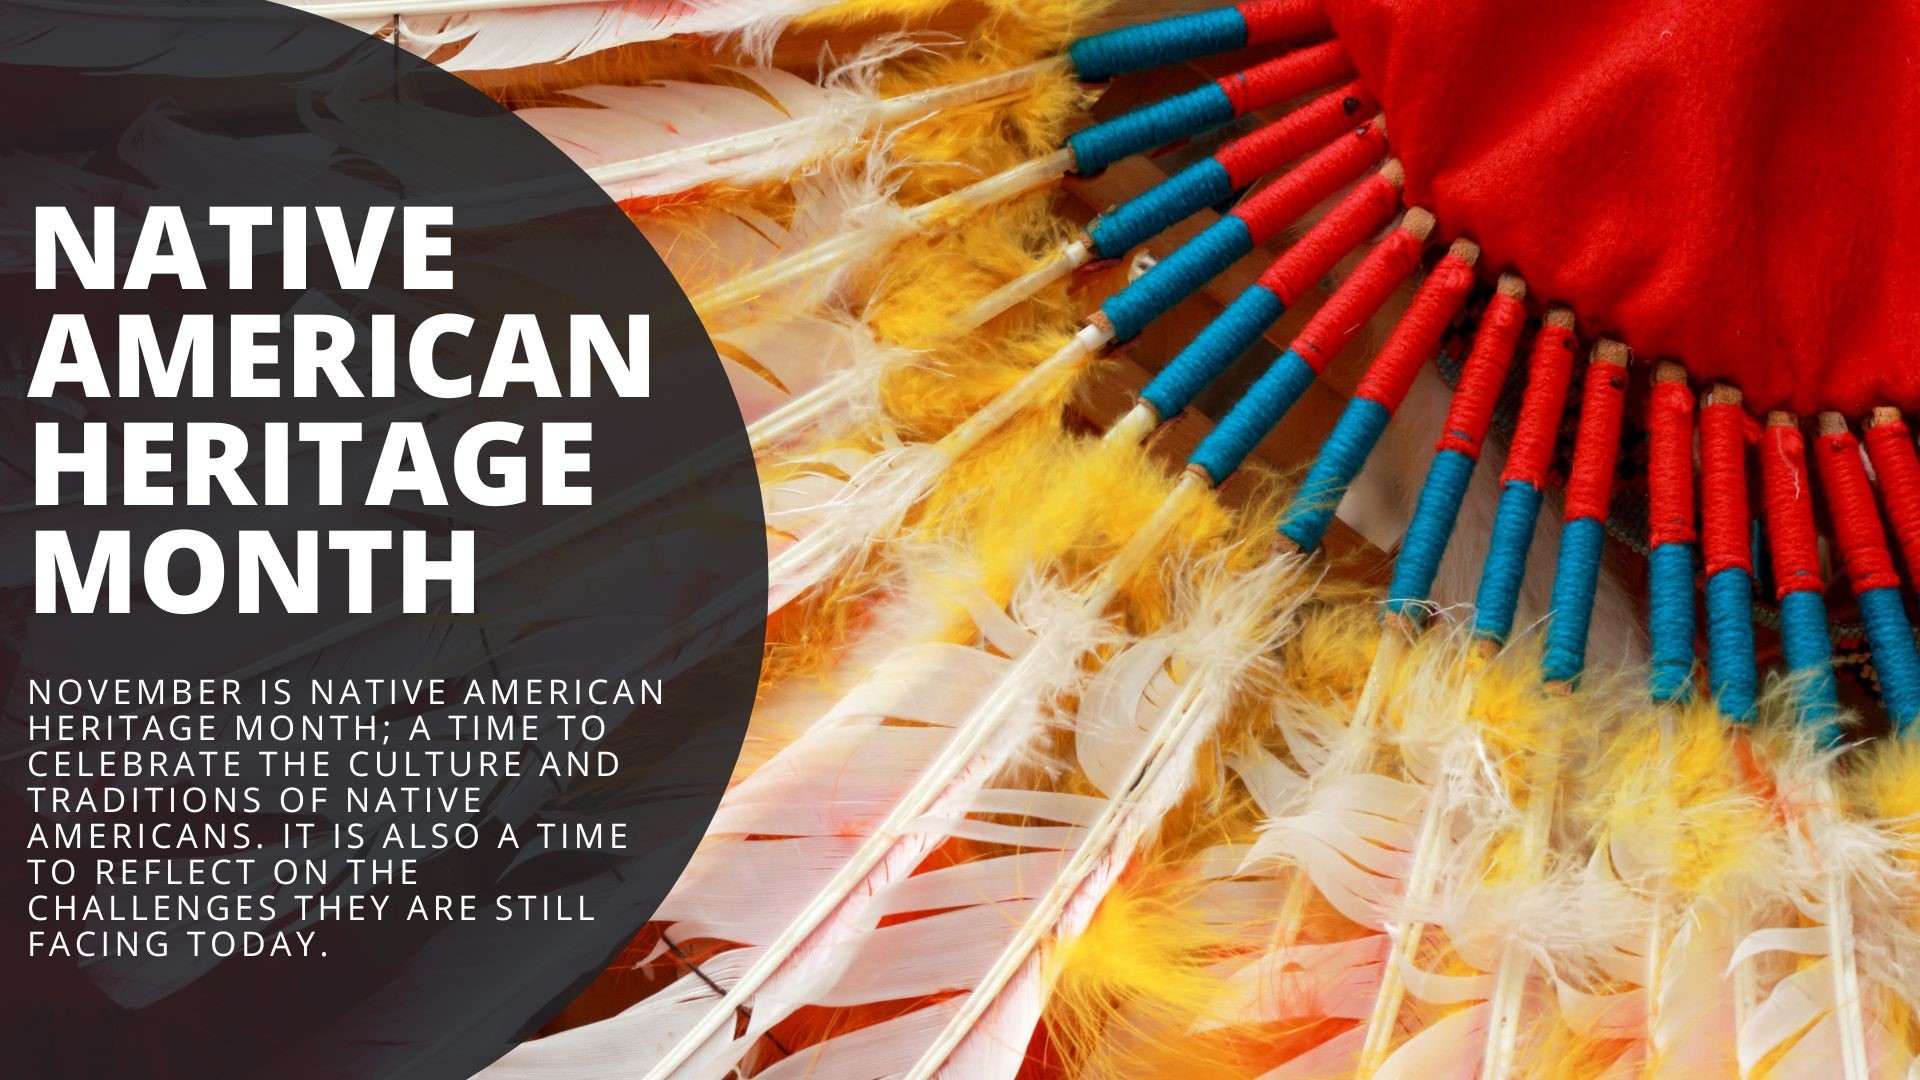 November is Native American Heritage Month; a time to celebrate their culture and traditions. It is also a time to reflect on the challenges they still face today.